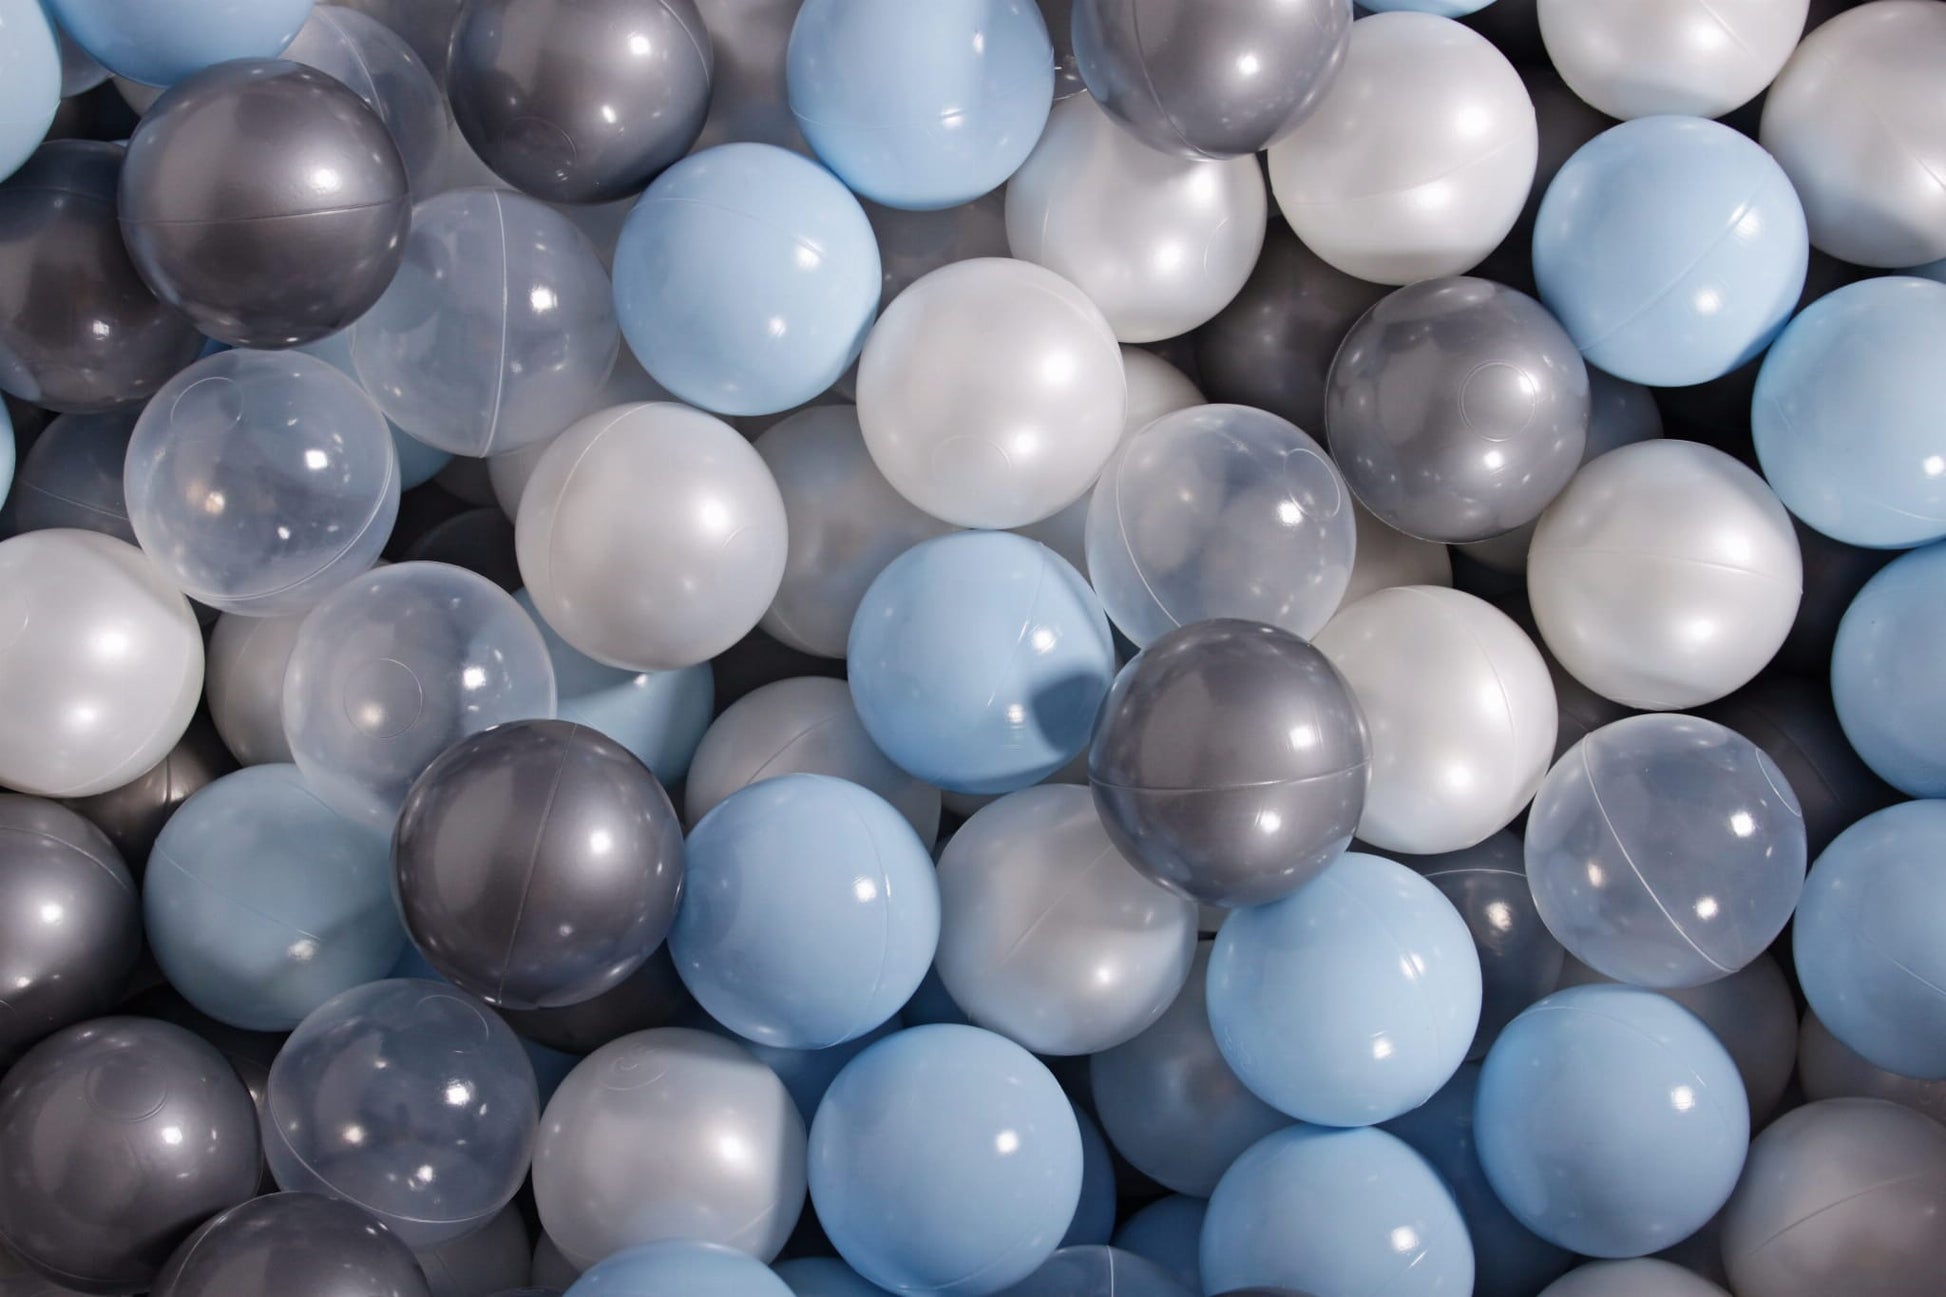 Luxury Cotton Round Ball Pit - Cool 'n Calm For Kids By MeowBaby - Stylemykid.com